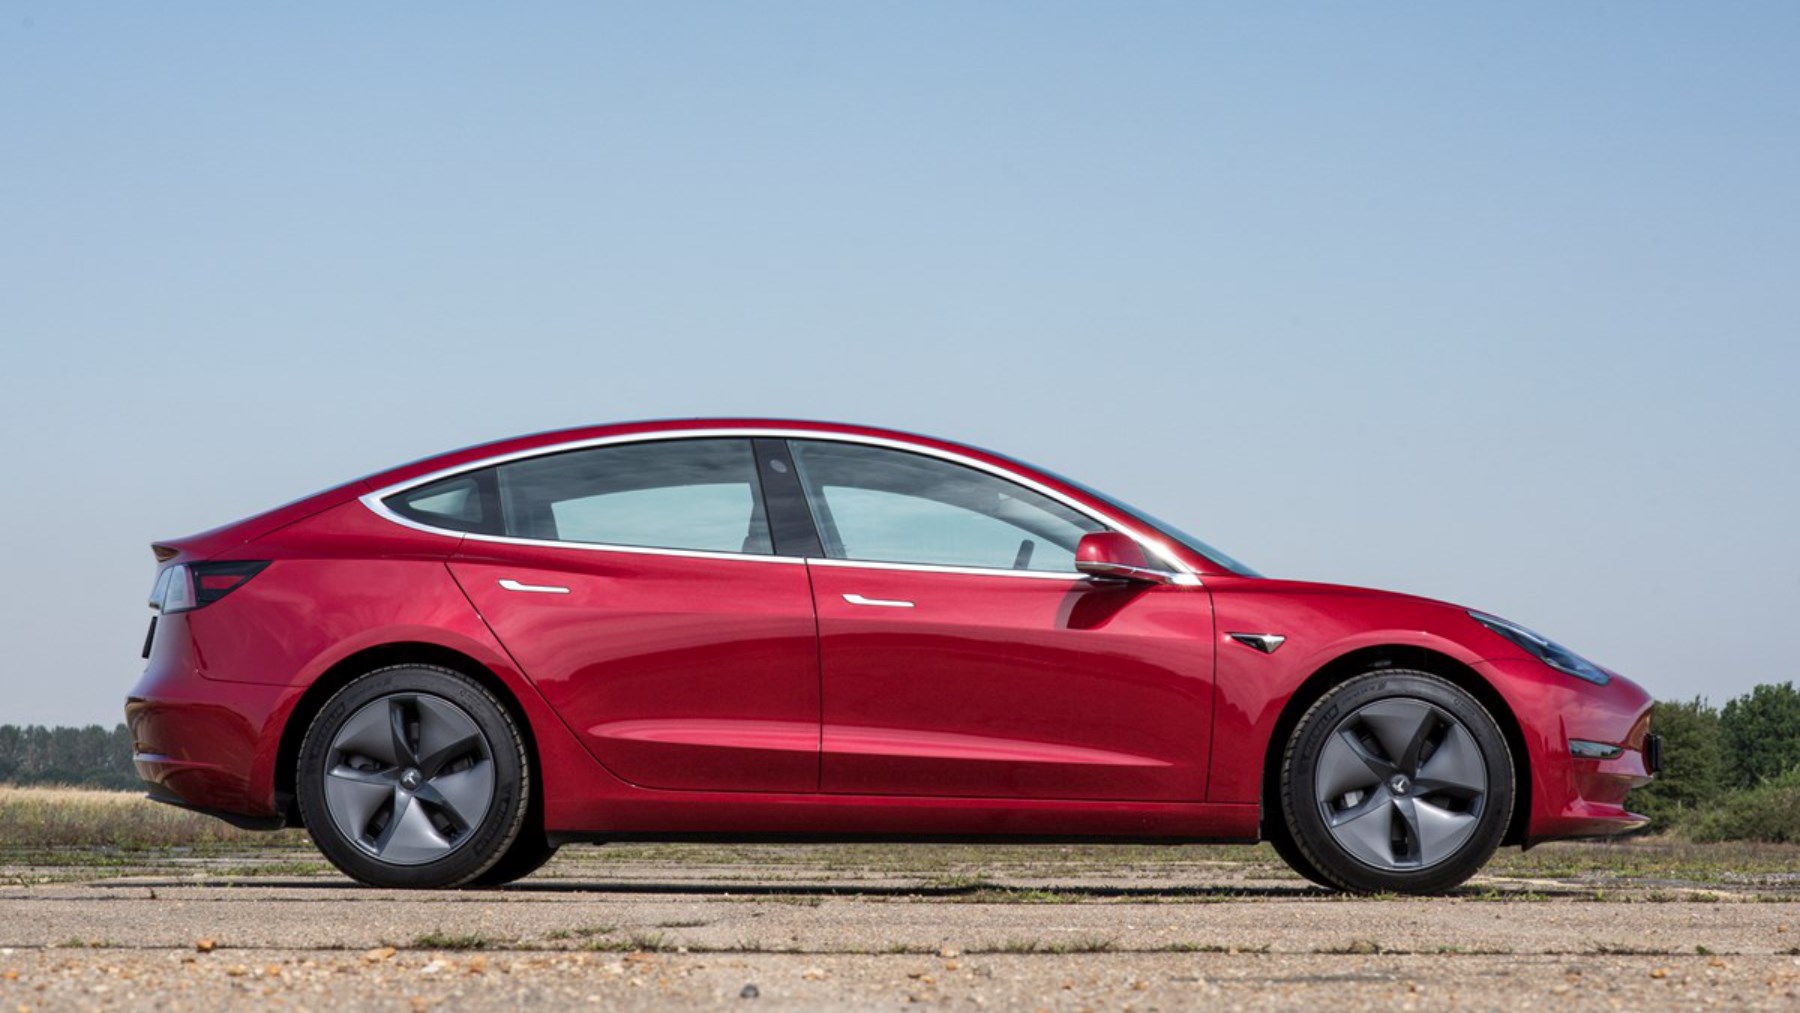 Tesla brings back scrappage, annoys enthusiasts